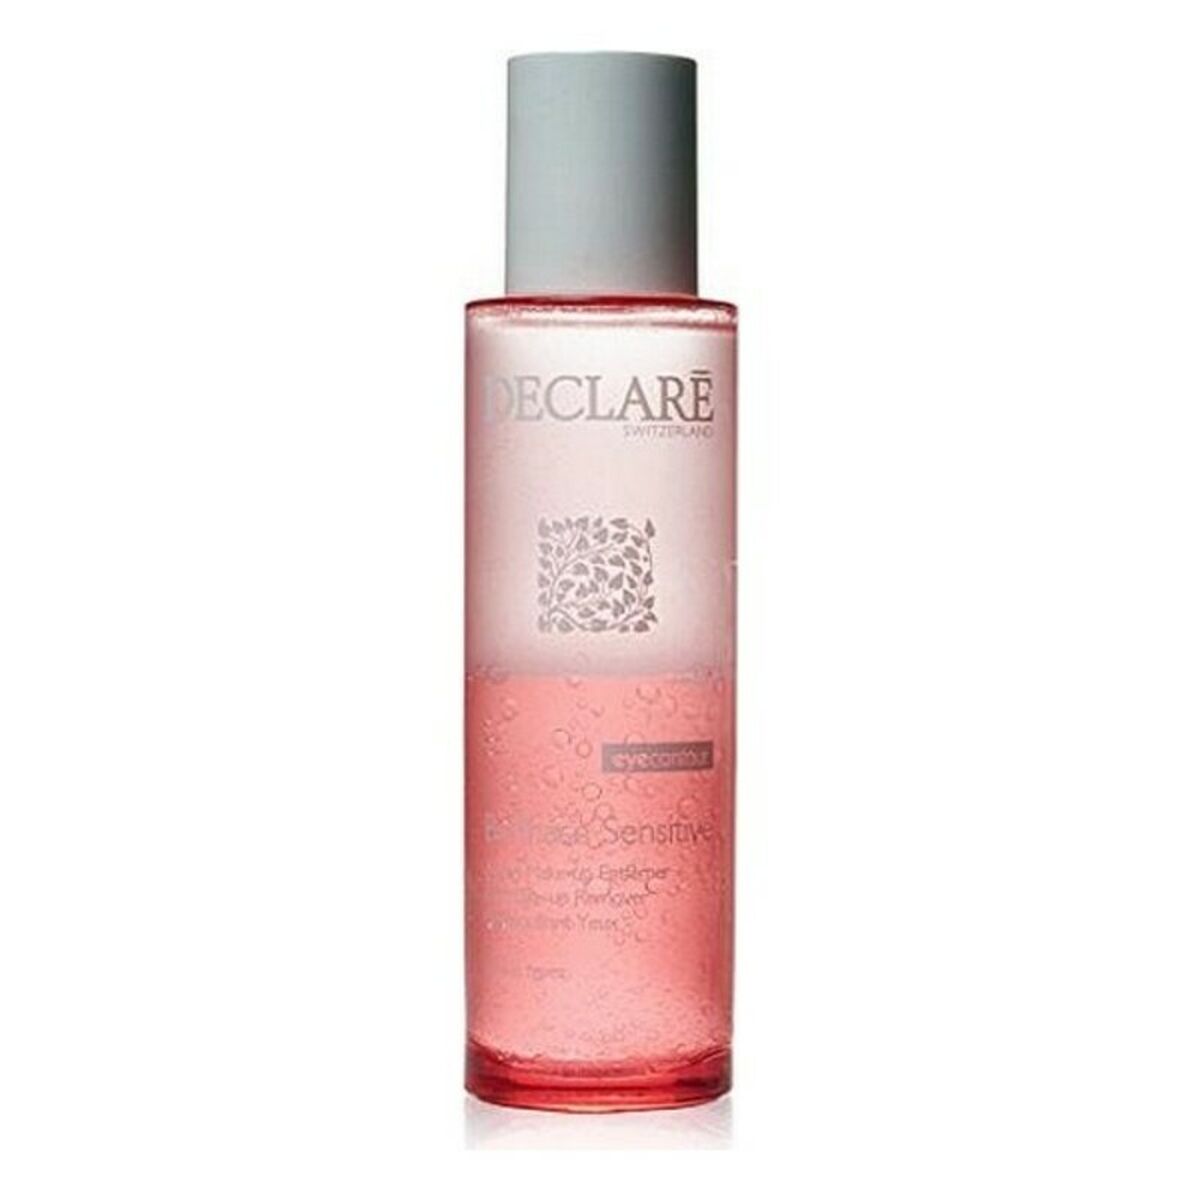 Eye Make Up Remover Soft Cleansing Declaré 16032900 (100 ml)